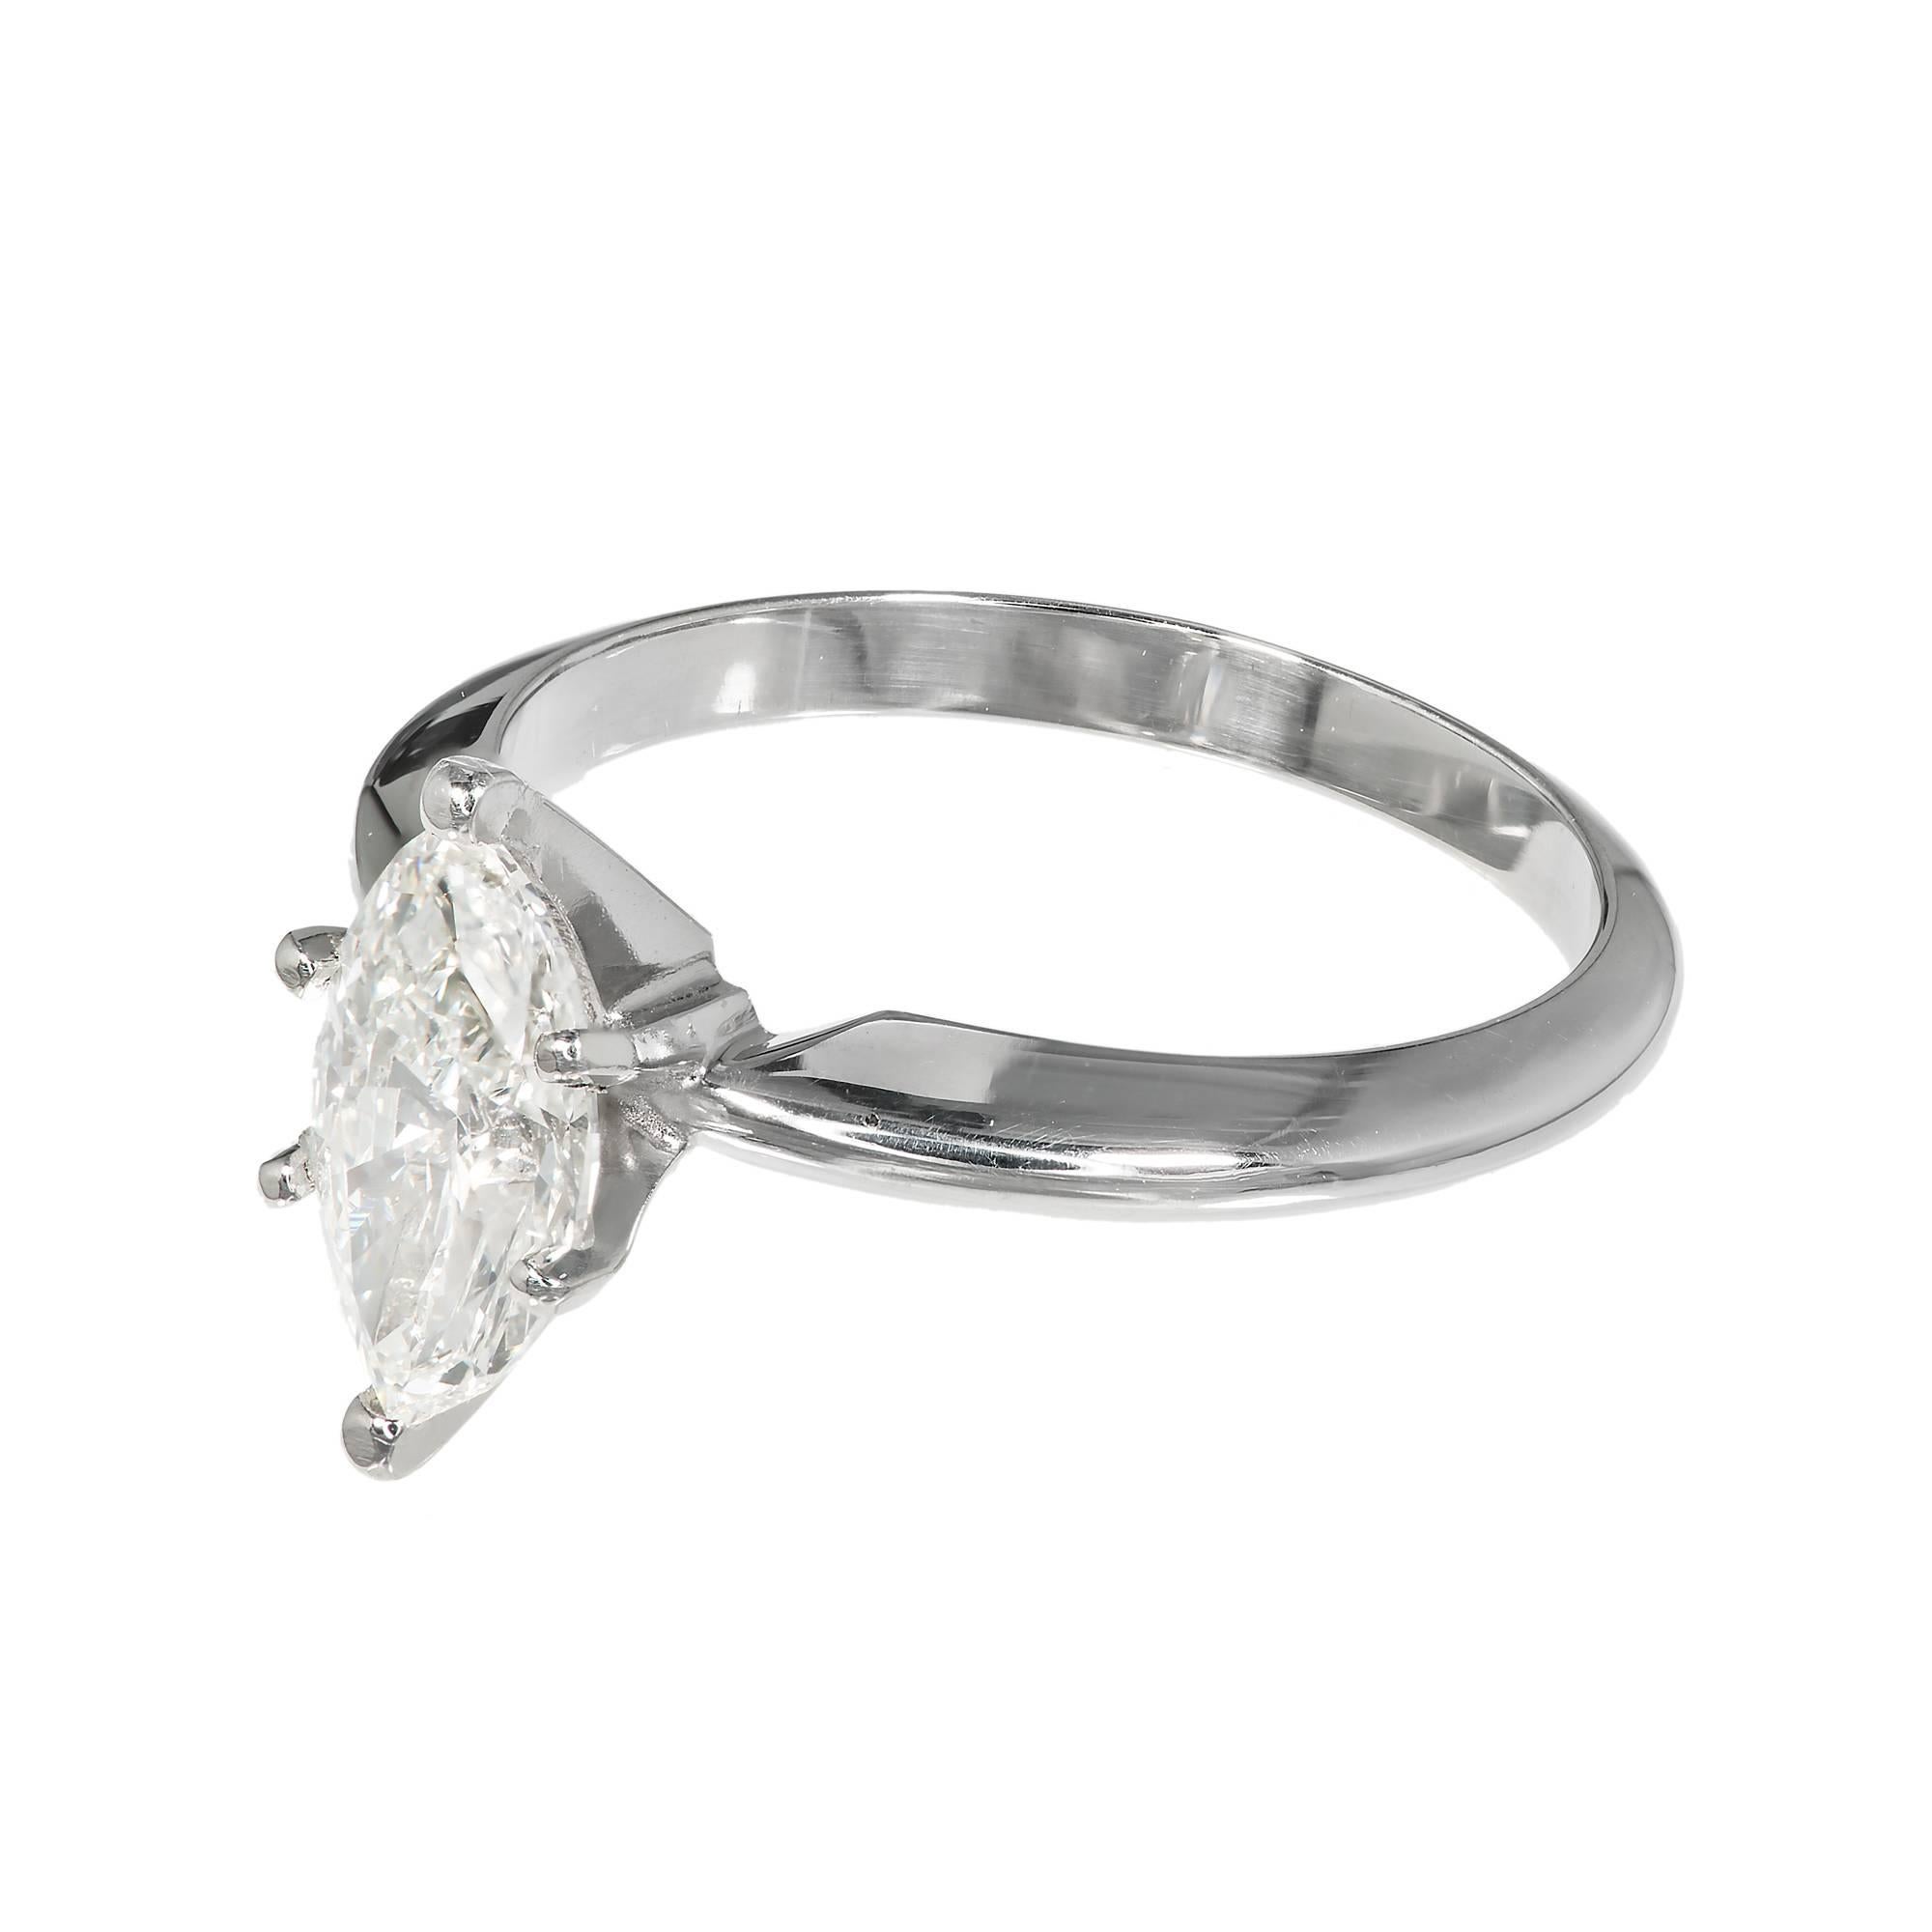 Marquise diamond solitiare engagement ring. Set in Platinum and crafted in the Peter Suchy Workshop. GIA certified. 

1 Marquise diamond, approx. total weight .99cts, I, SI2, GIA certificate #5171257108
Size 6 and sizable
Platinum
Tested: